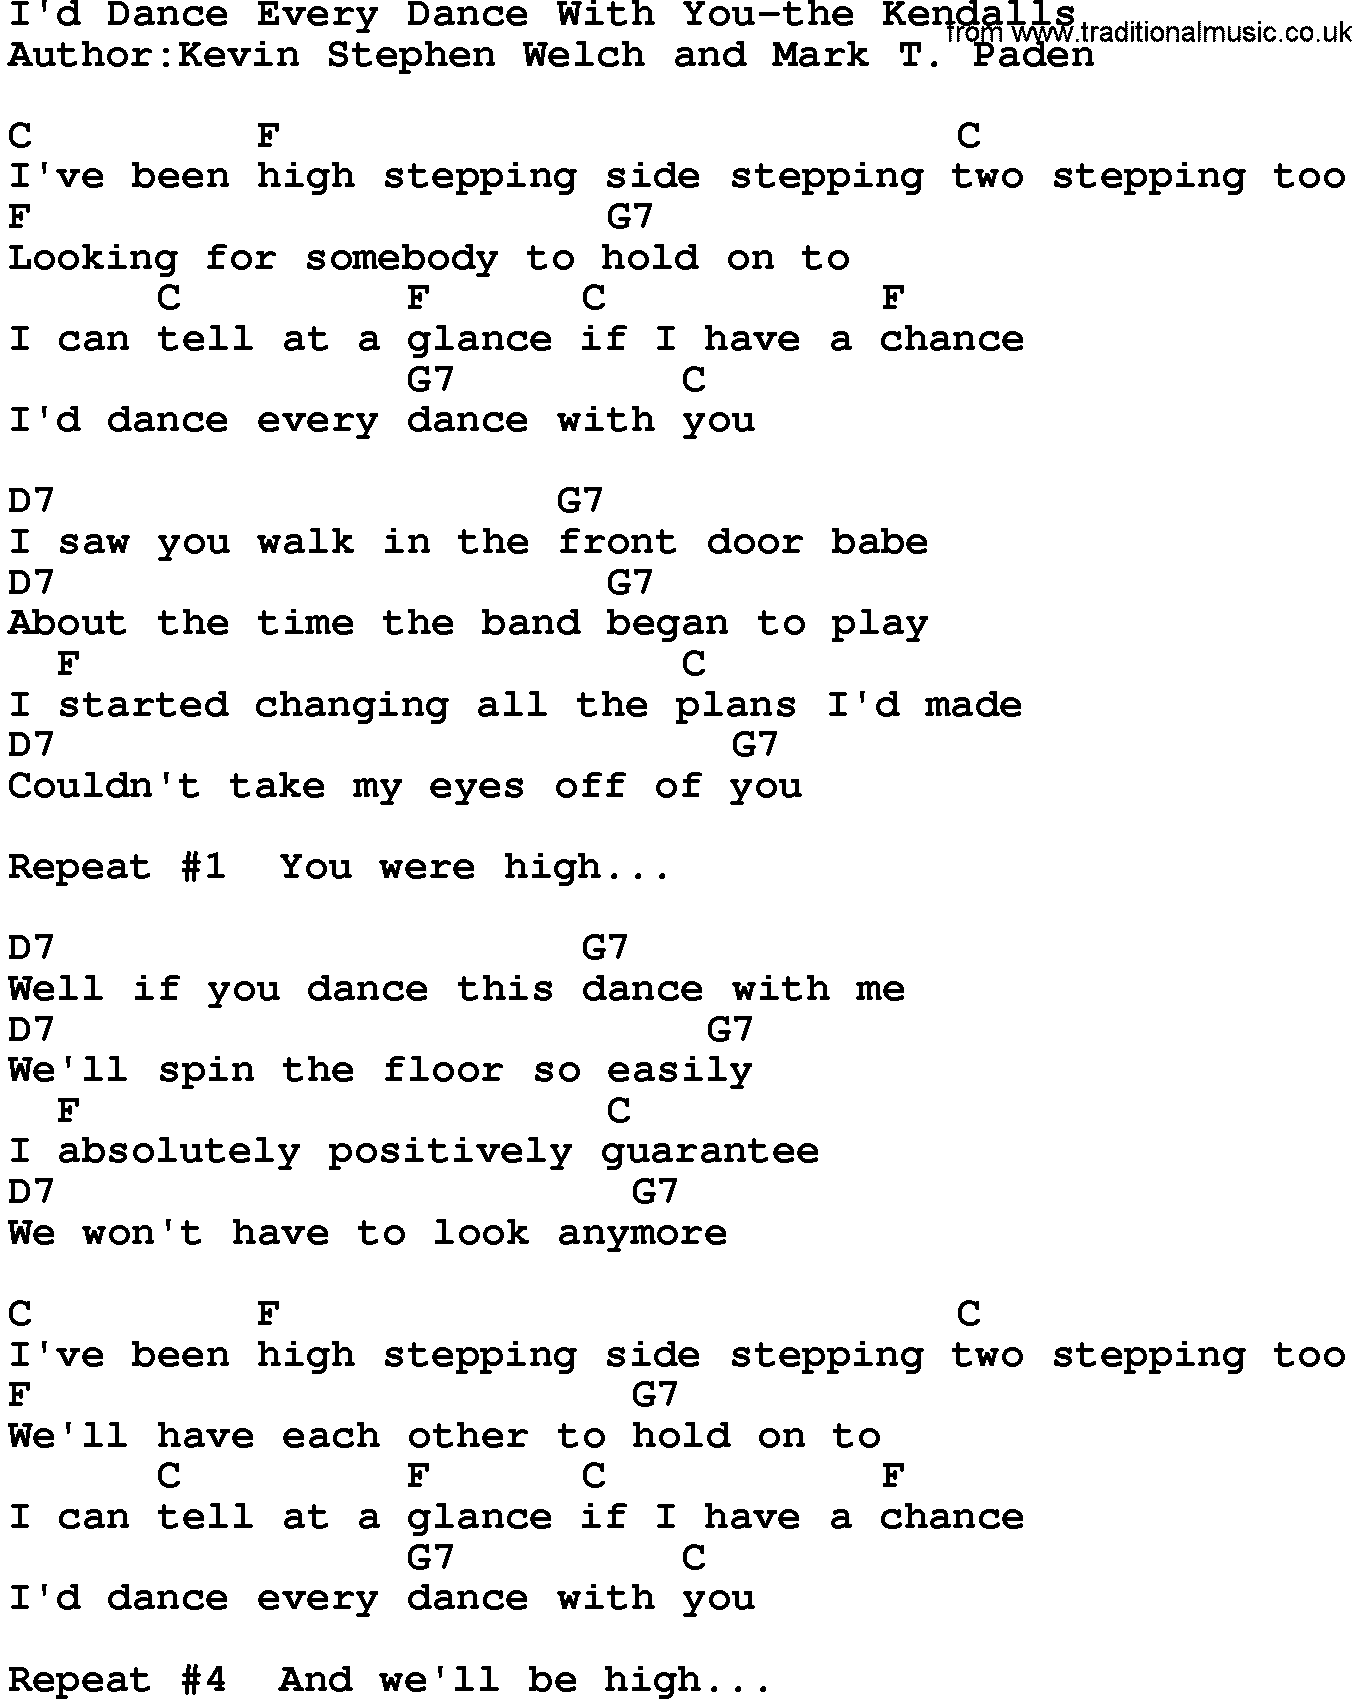 Country music song: I'd Dance Every Dance With You-The Kendalls lyrics and chords